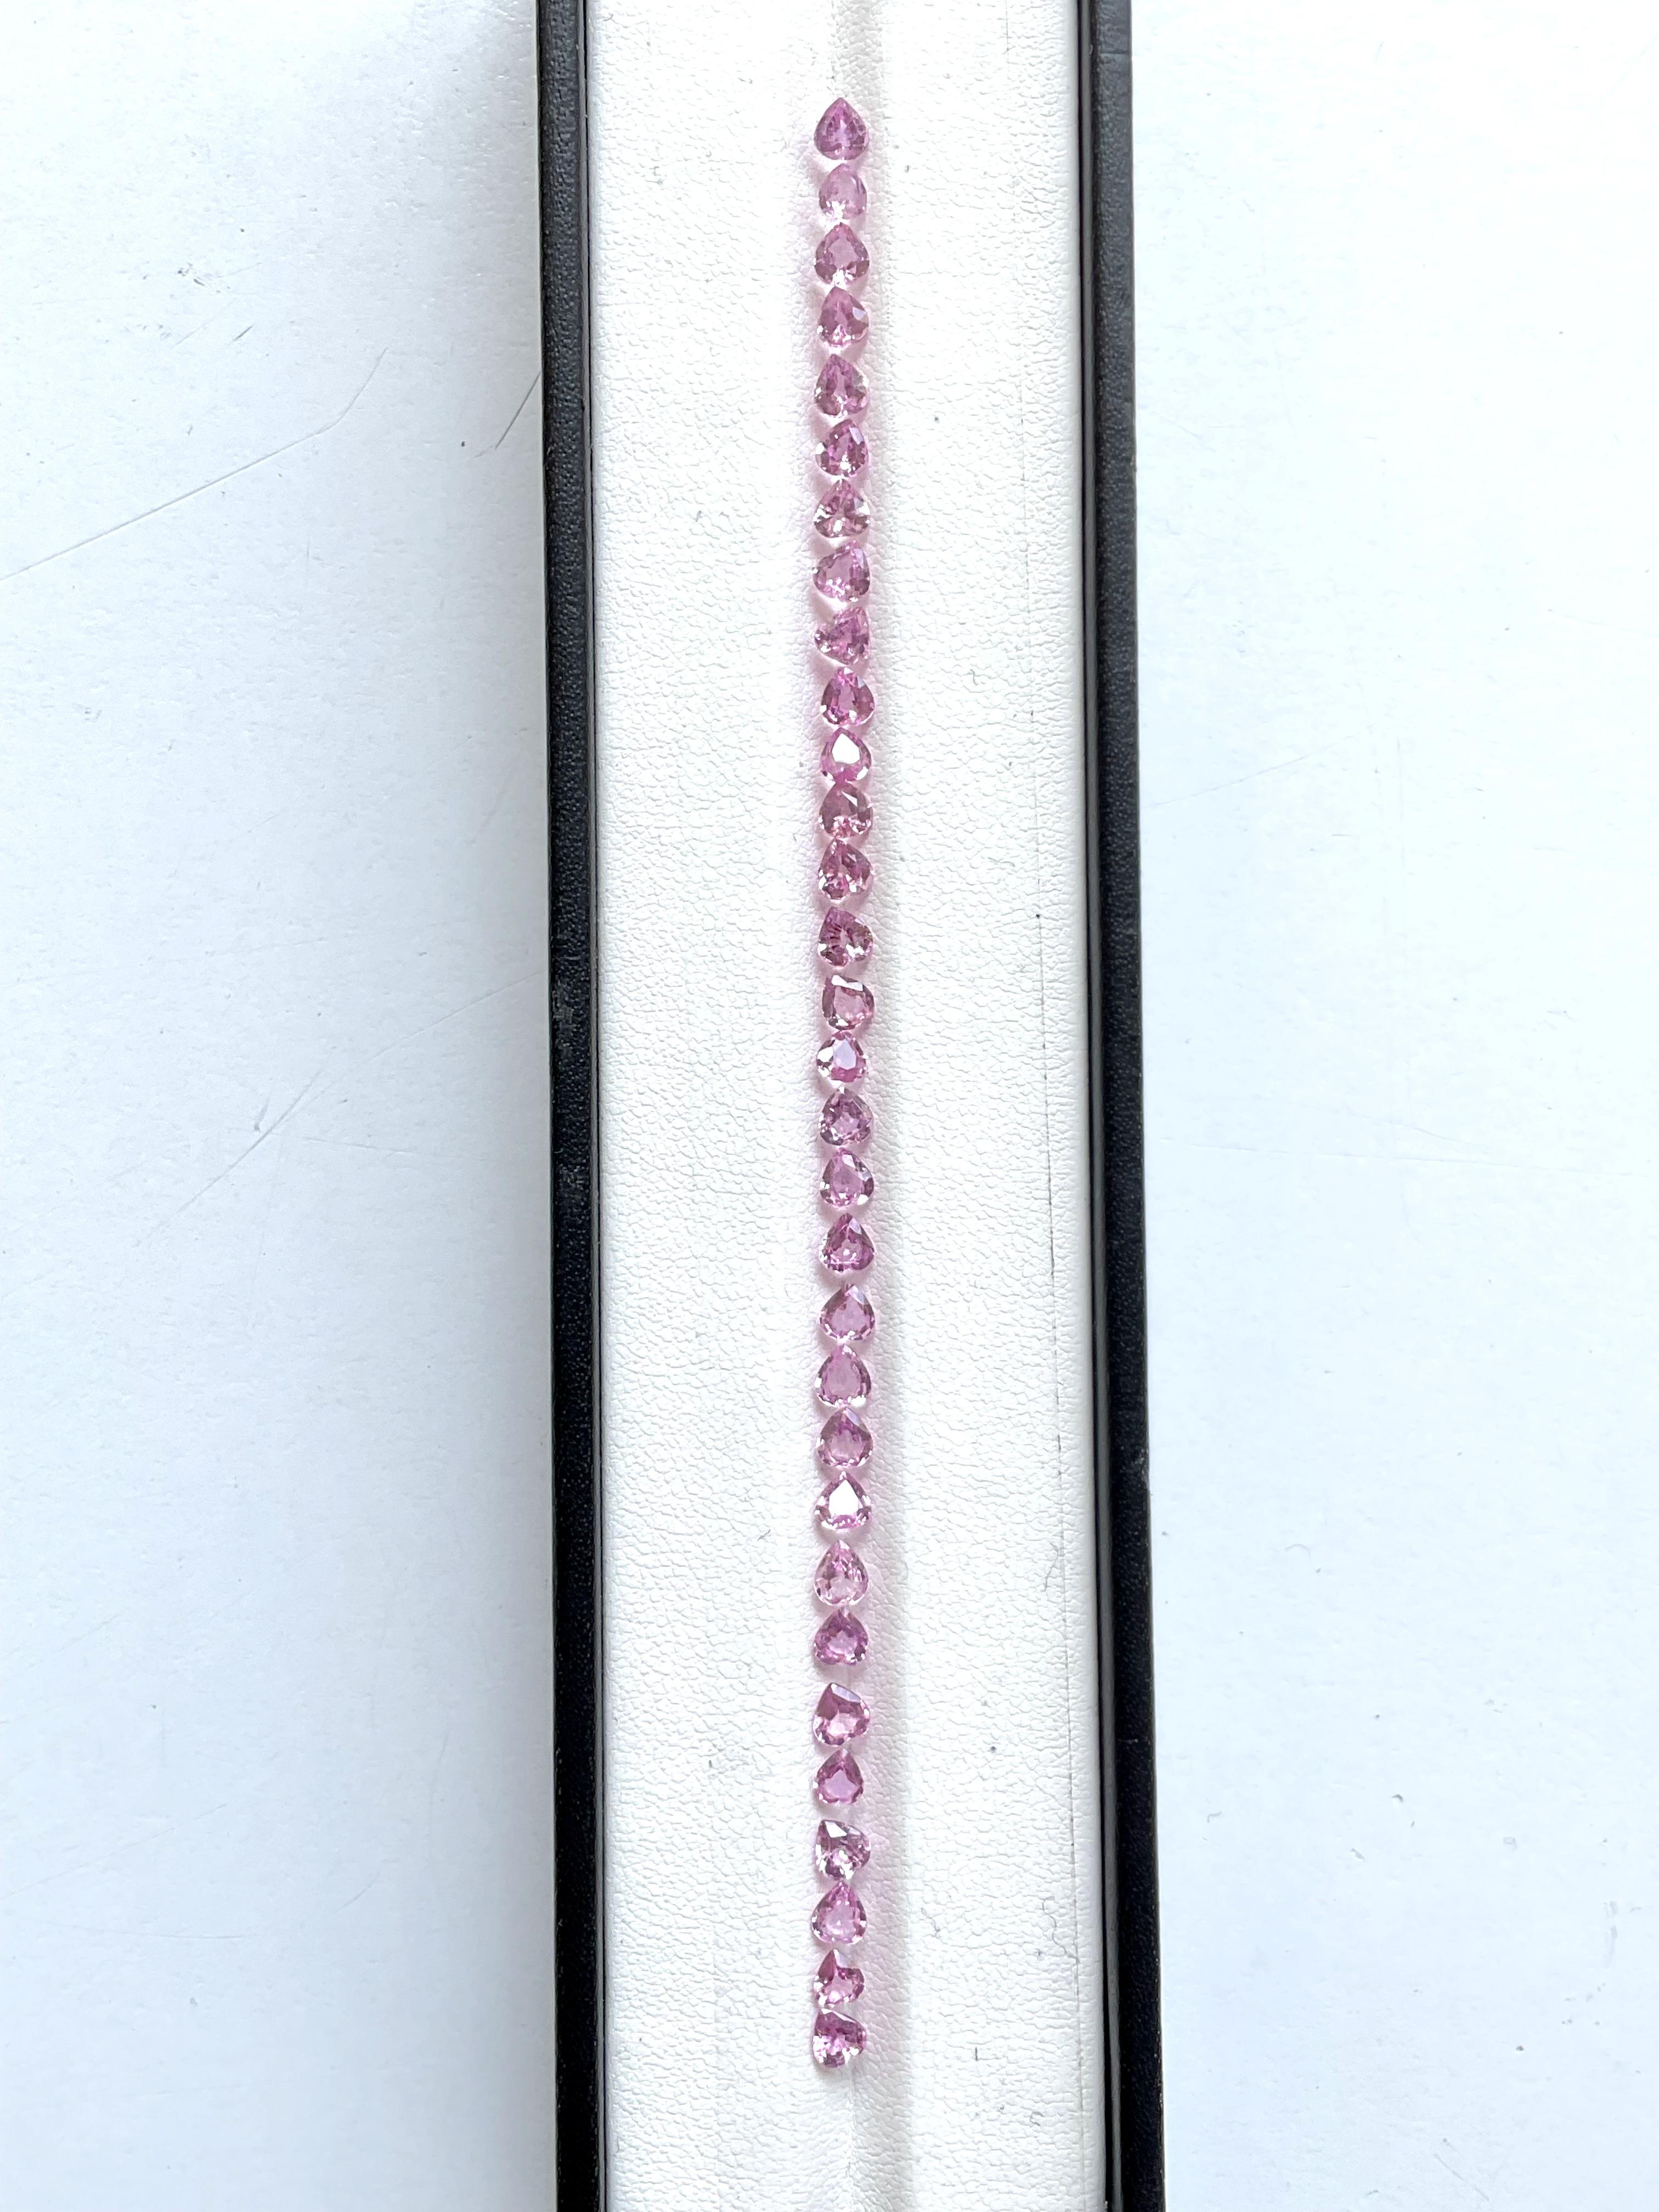 7.47 cts Pink Sapphire Heart shape bracelet set cutstones For Fine Jewelry gems In New Condition For Sale In Jaipur, RJ